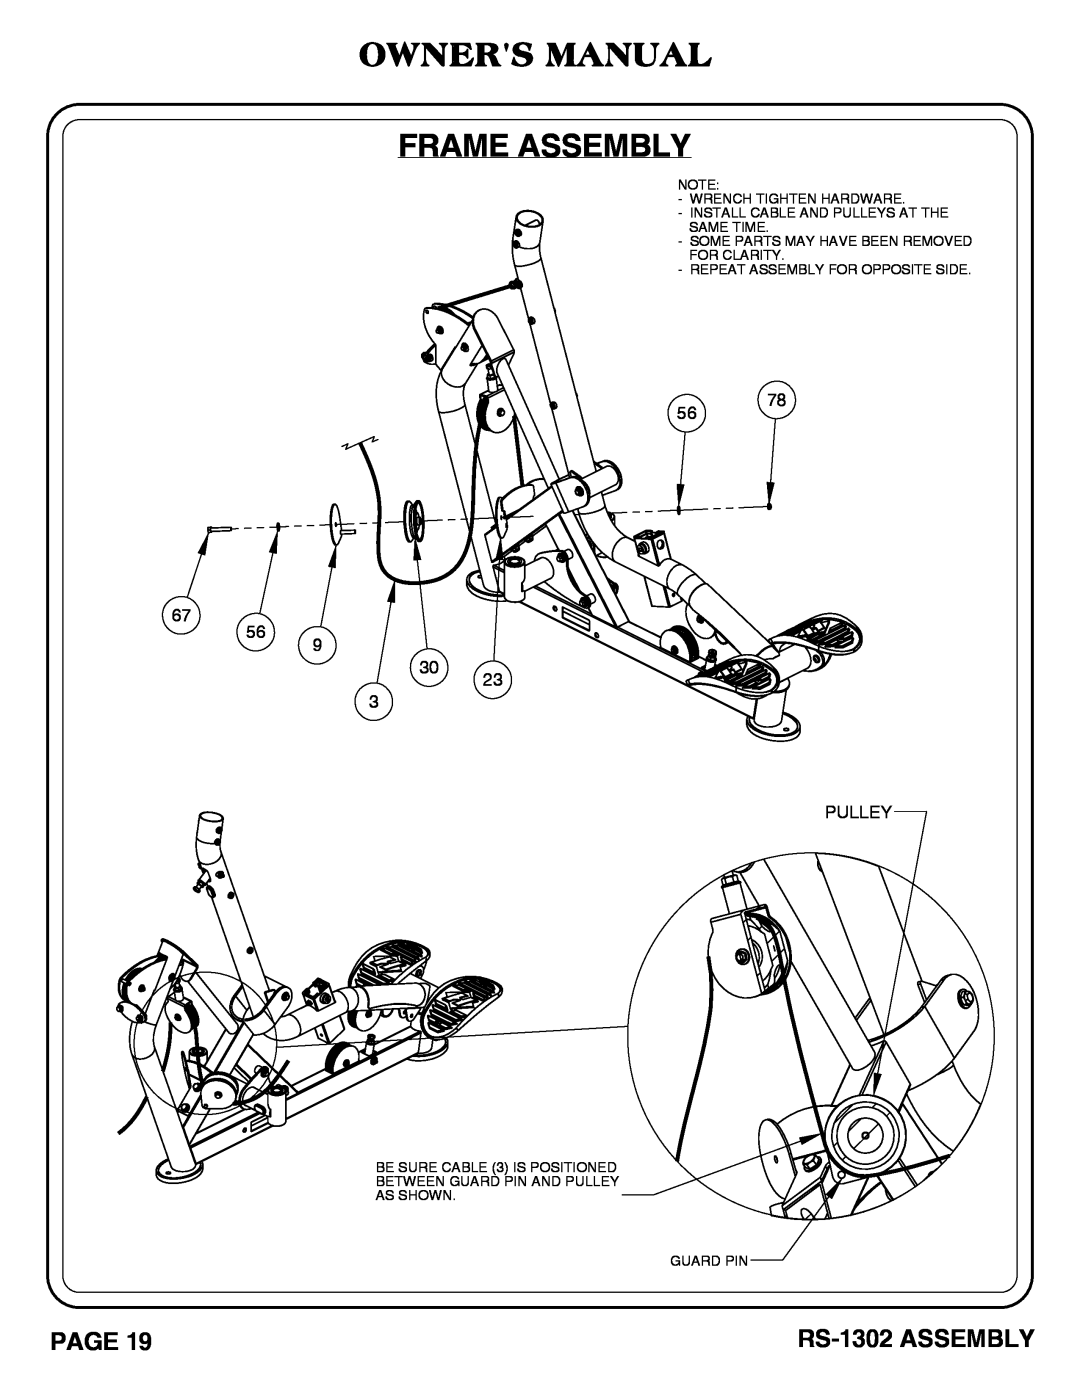 Hoist Fitness Owners Manual Frame Assembly, RS-1302 ASSEMBLY, Some Parts May Have Been Removed For Clarity, Guard Pin 